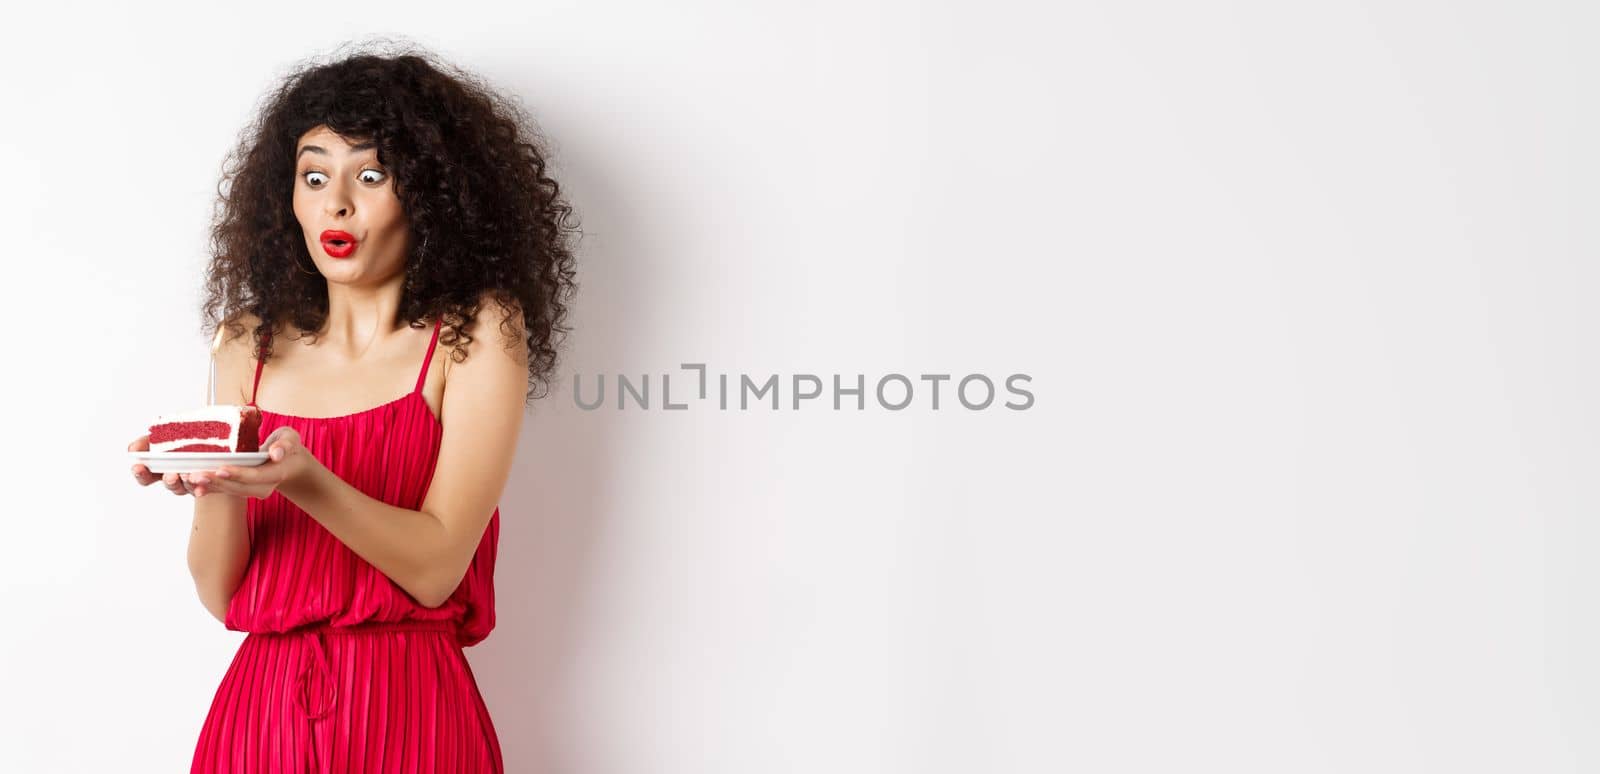 Excited birthday girl in red dress blowing candle on cake and making wish, standing on white background.